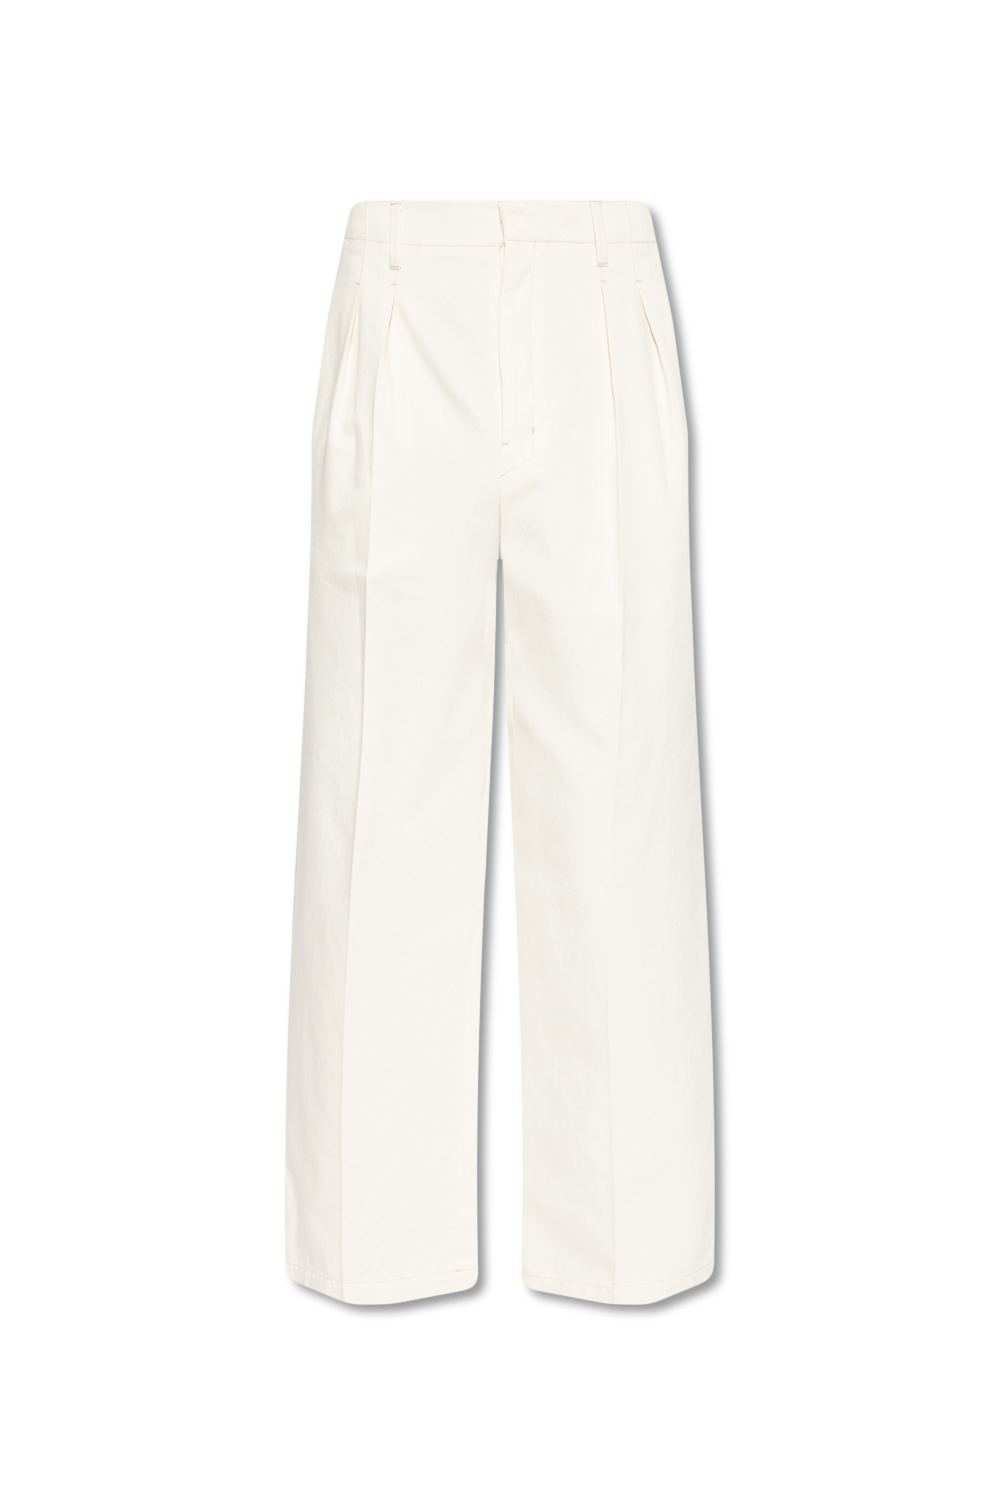 Lemaire emporio trousers with double pleats